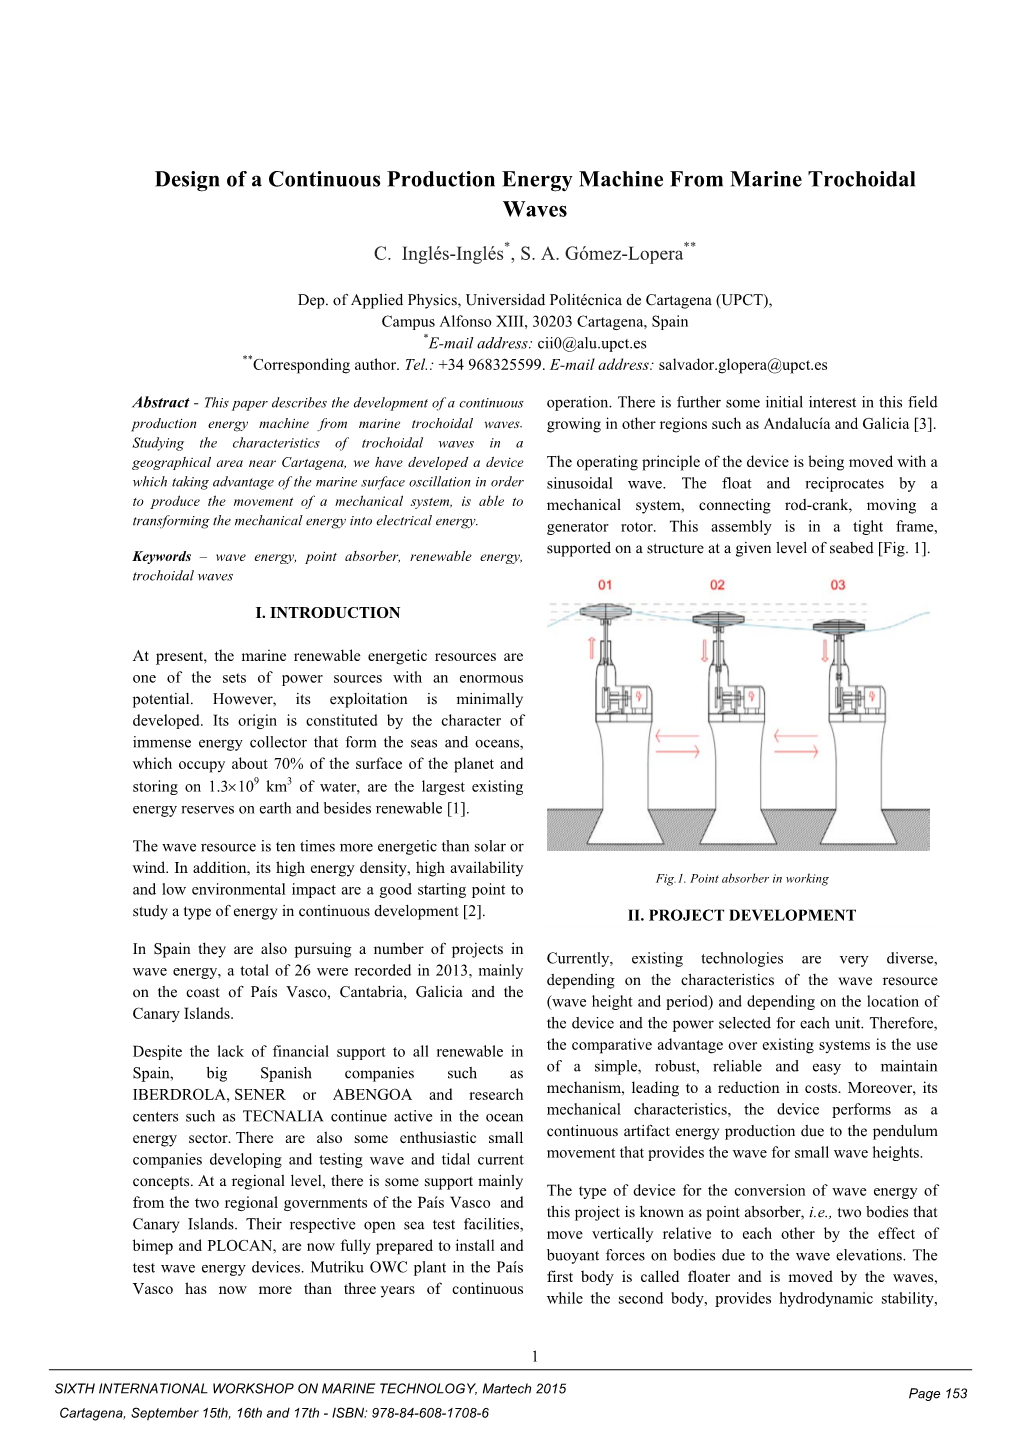 Design of a Continuous Production Energy Machine from Marine Trochoidal Waves